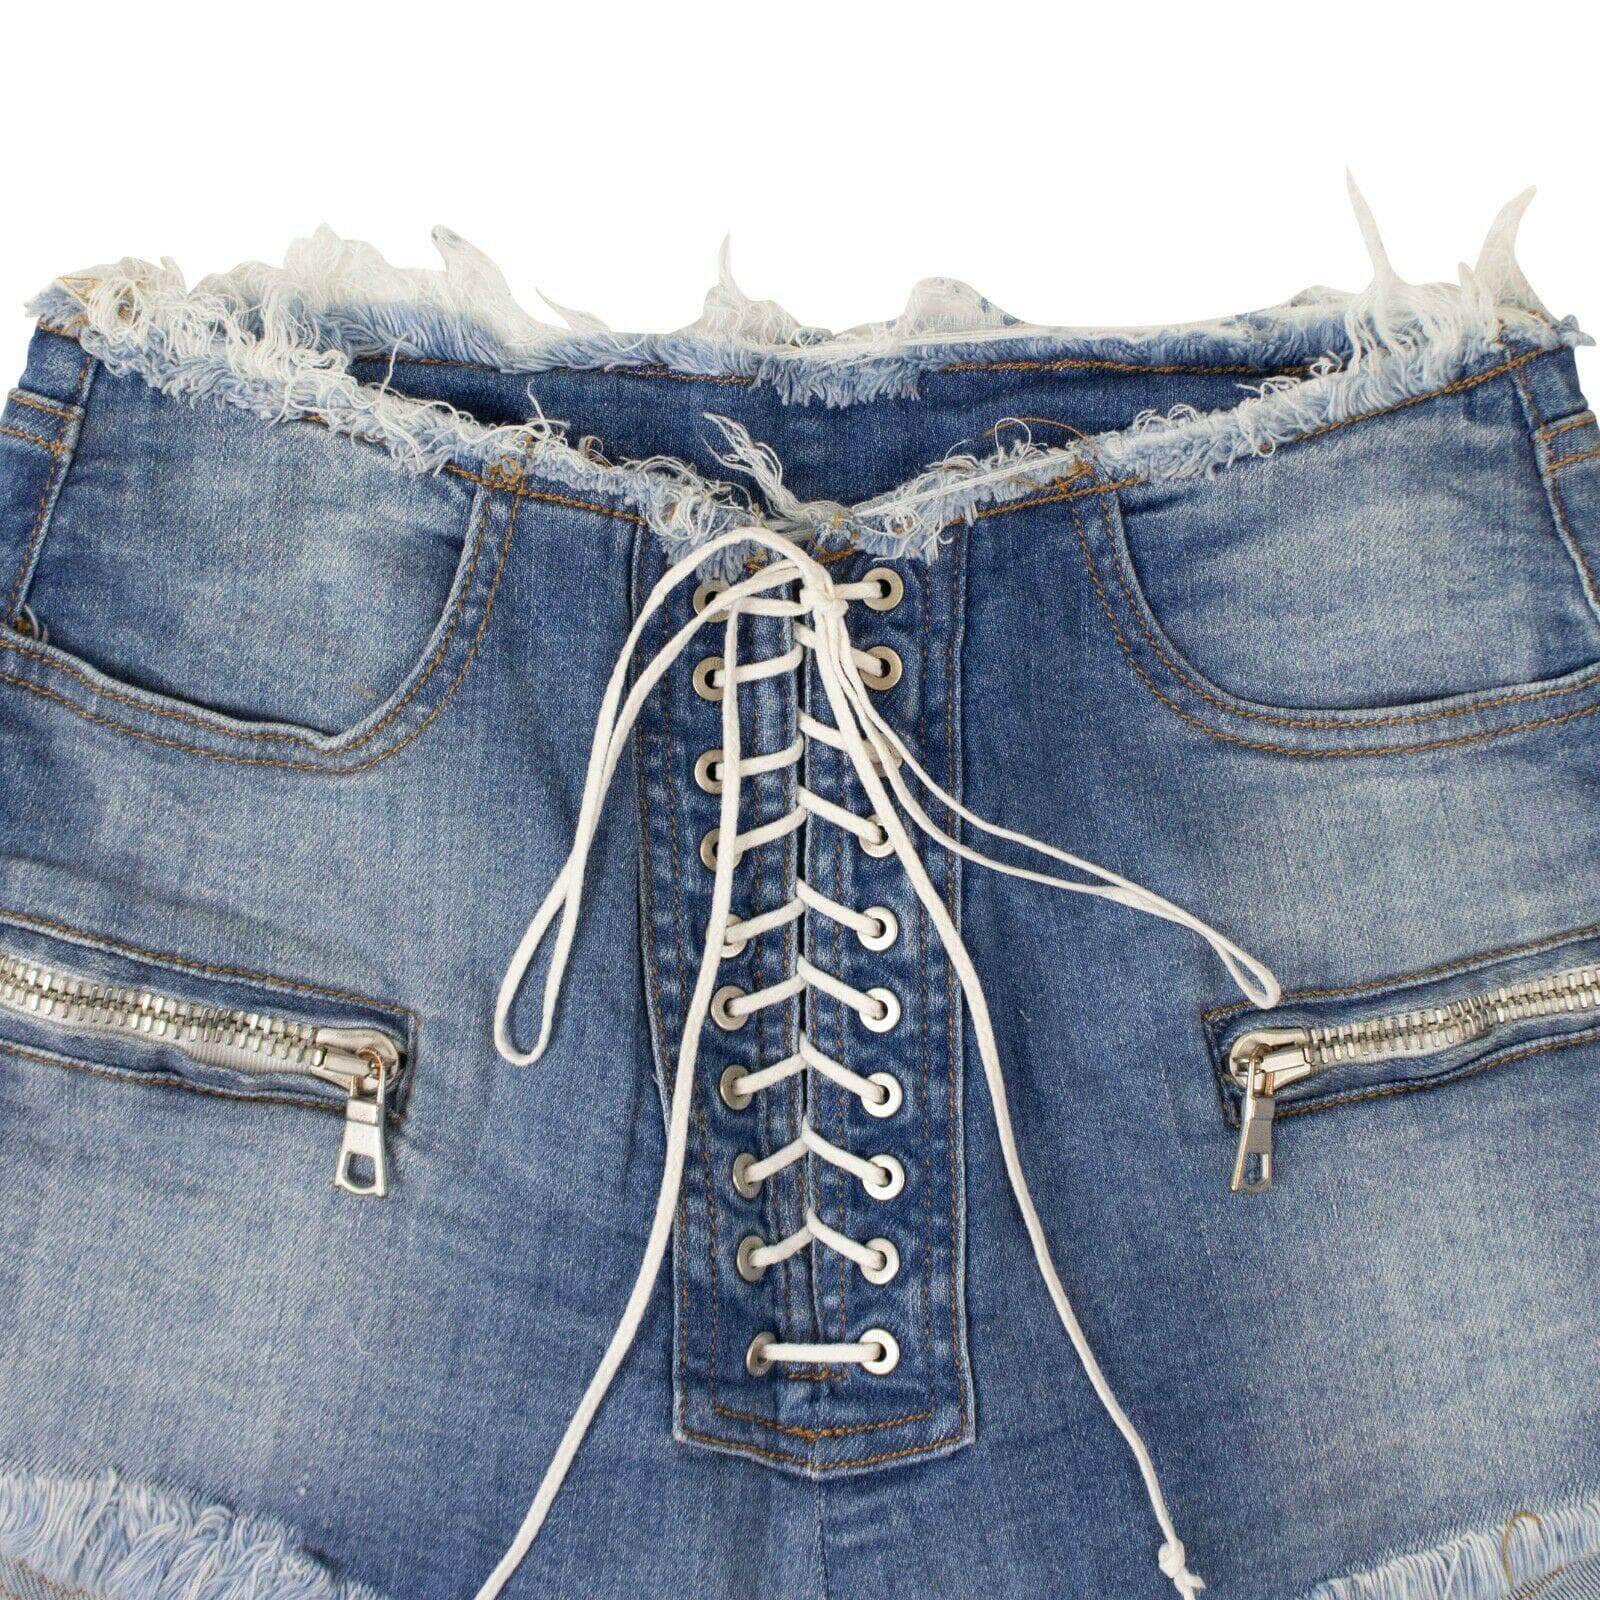 Unravel Project channelenable-all, chicmi, couponcollection, gender-womens, main-clothing, size-24, size-25, size-26, size-28, under-250, unravel-project Denim Lace-Up Shorts